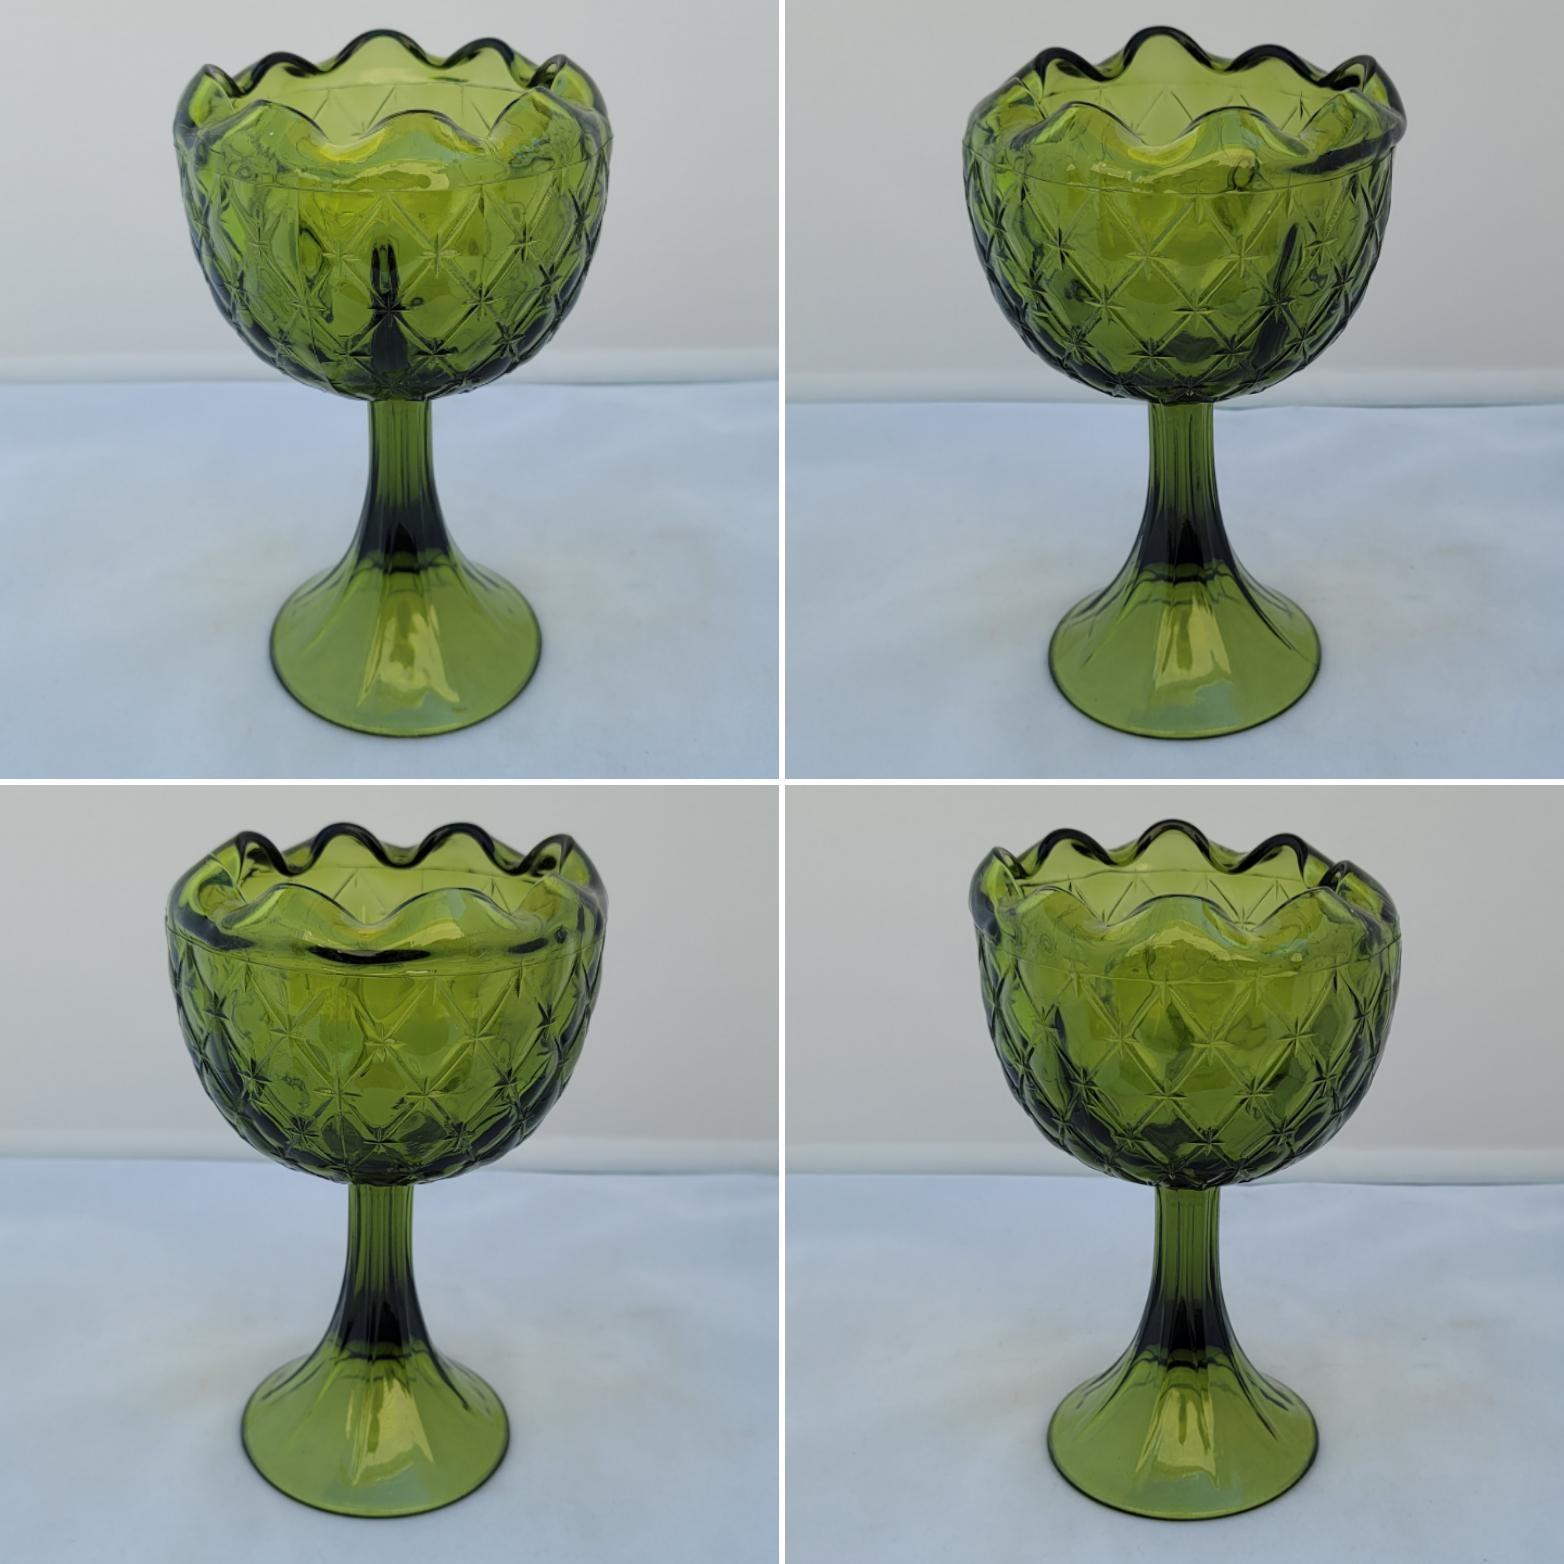 This gorgeous gothic or renaissance revival large decorative glass goblet has beautiful hand-made details and an overall shape and aesthetic that will be a welcome addition to any table top. Vibrant olive green tops of the beauty of this piece and